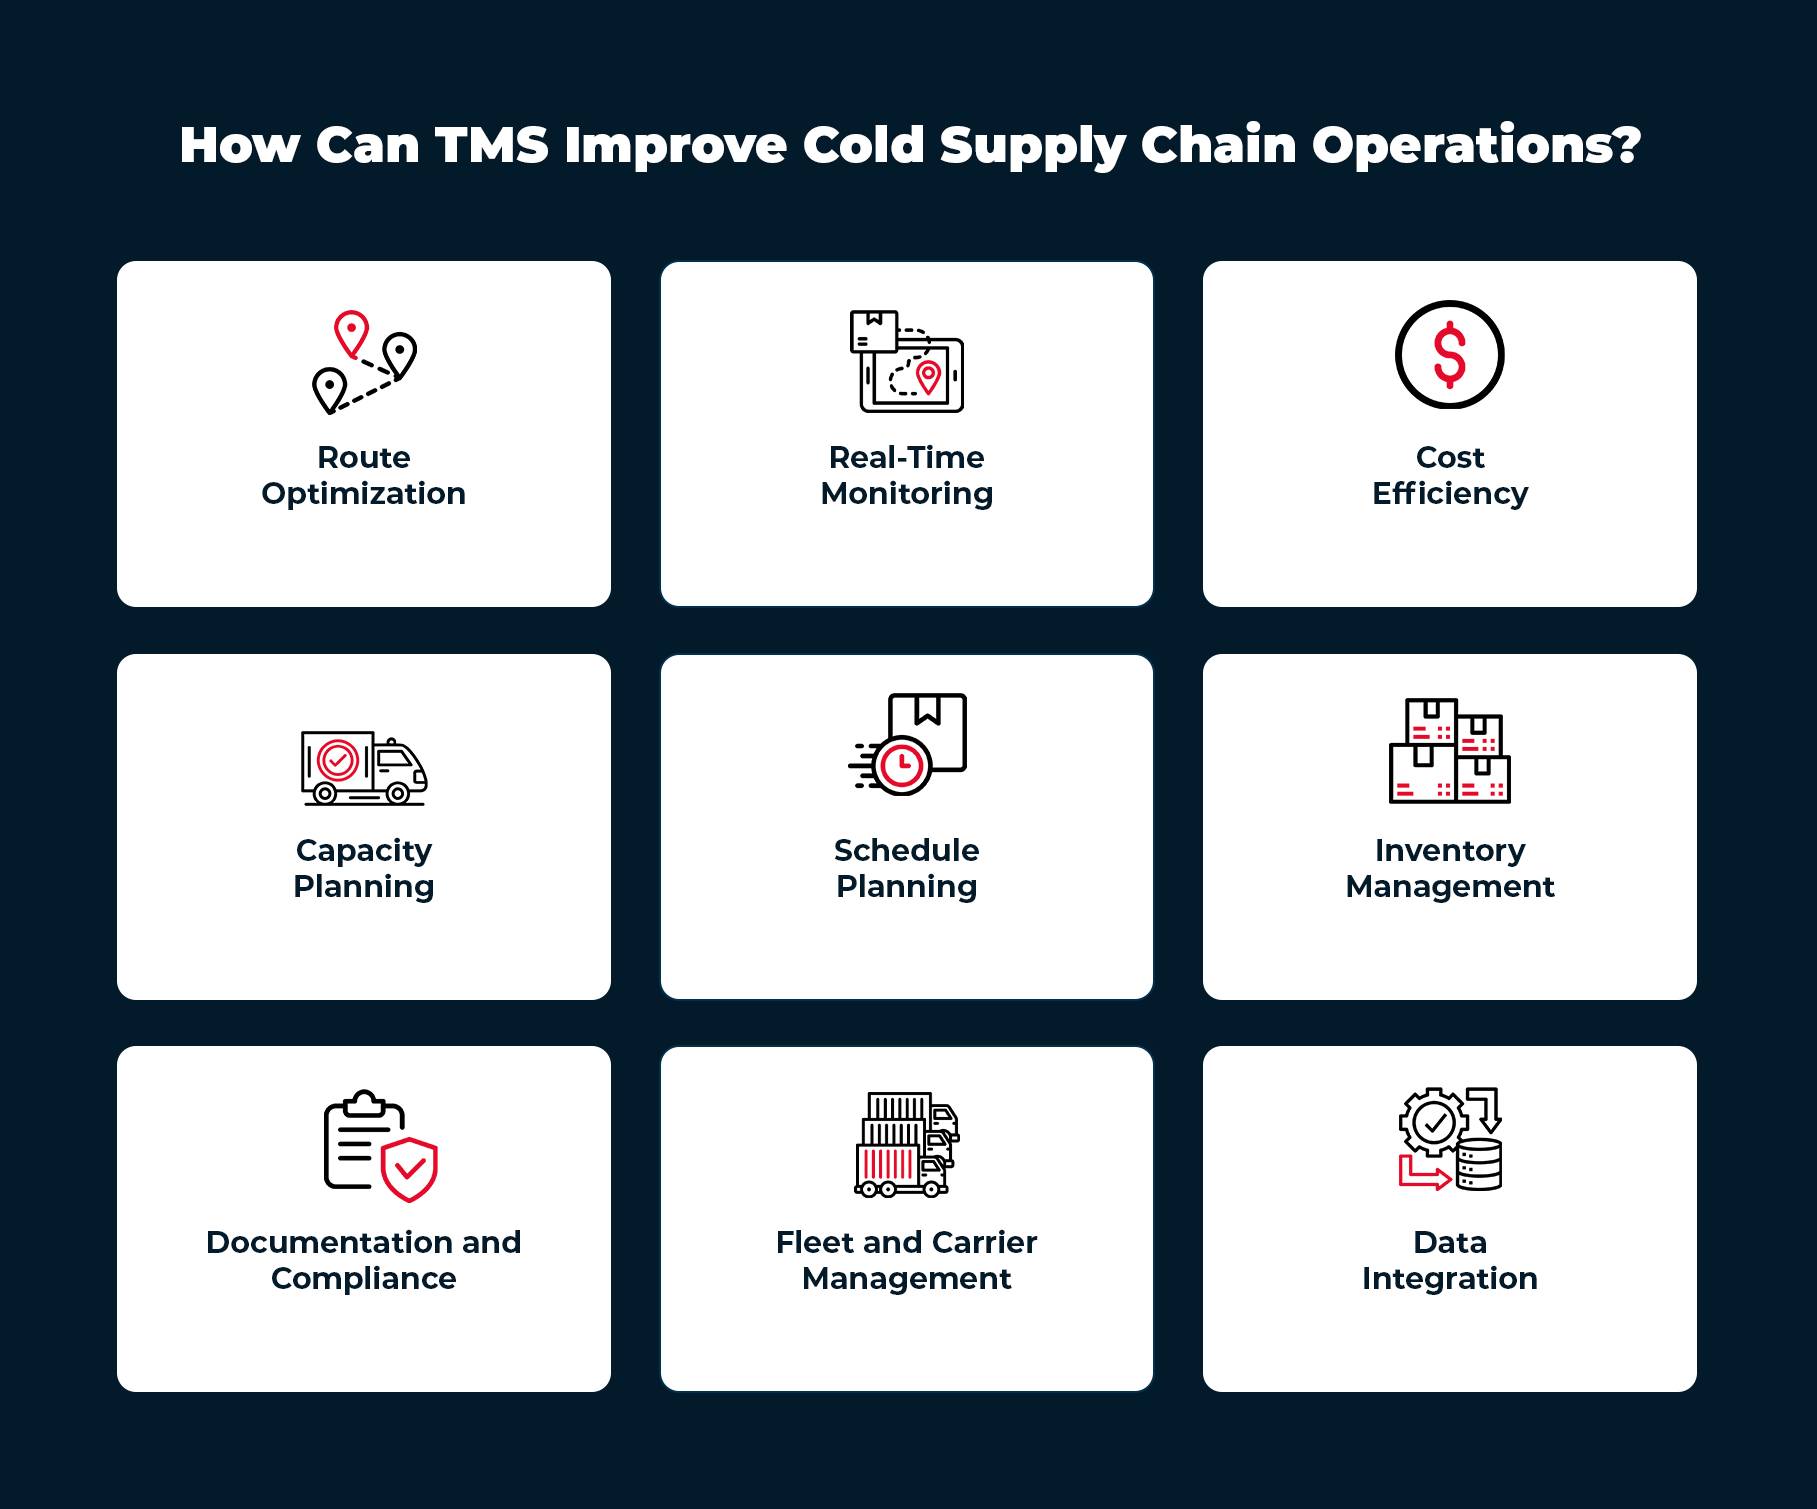 Best TMS Solution to Improve Cold Supply Chain Operations